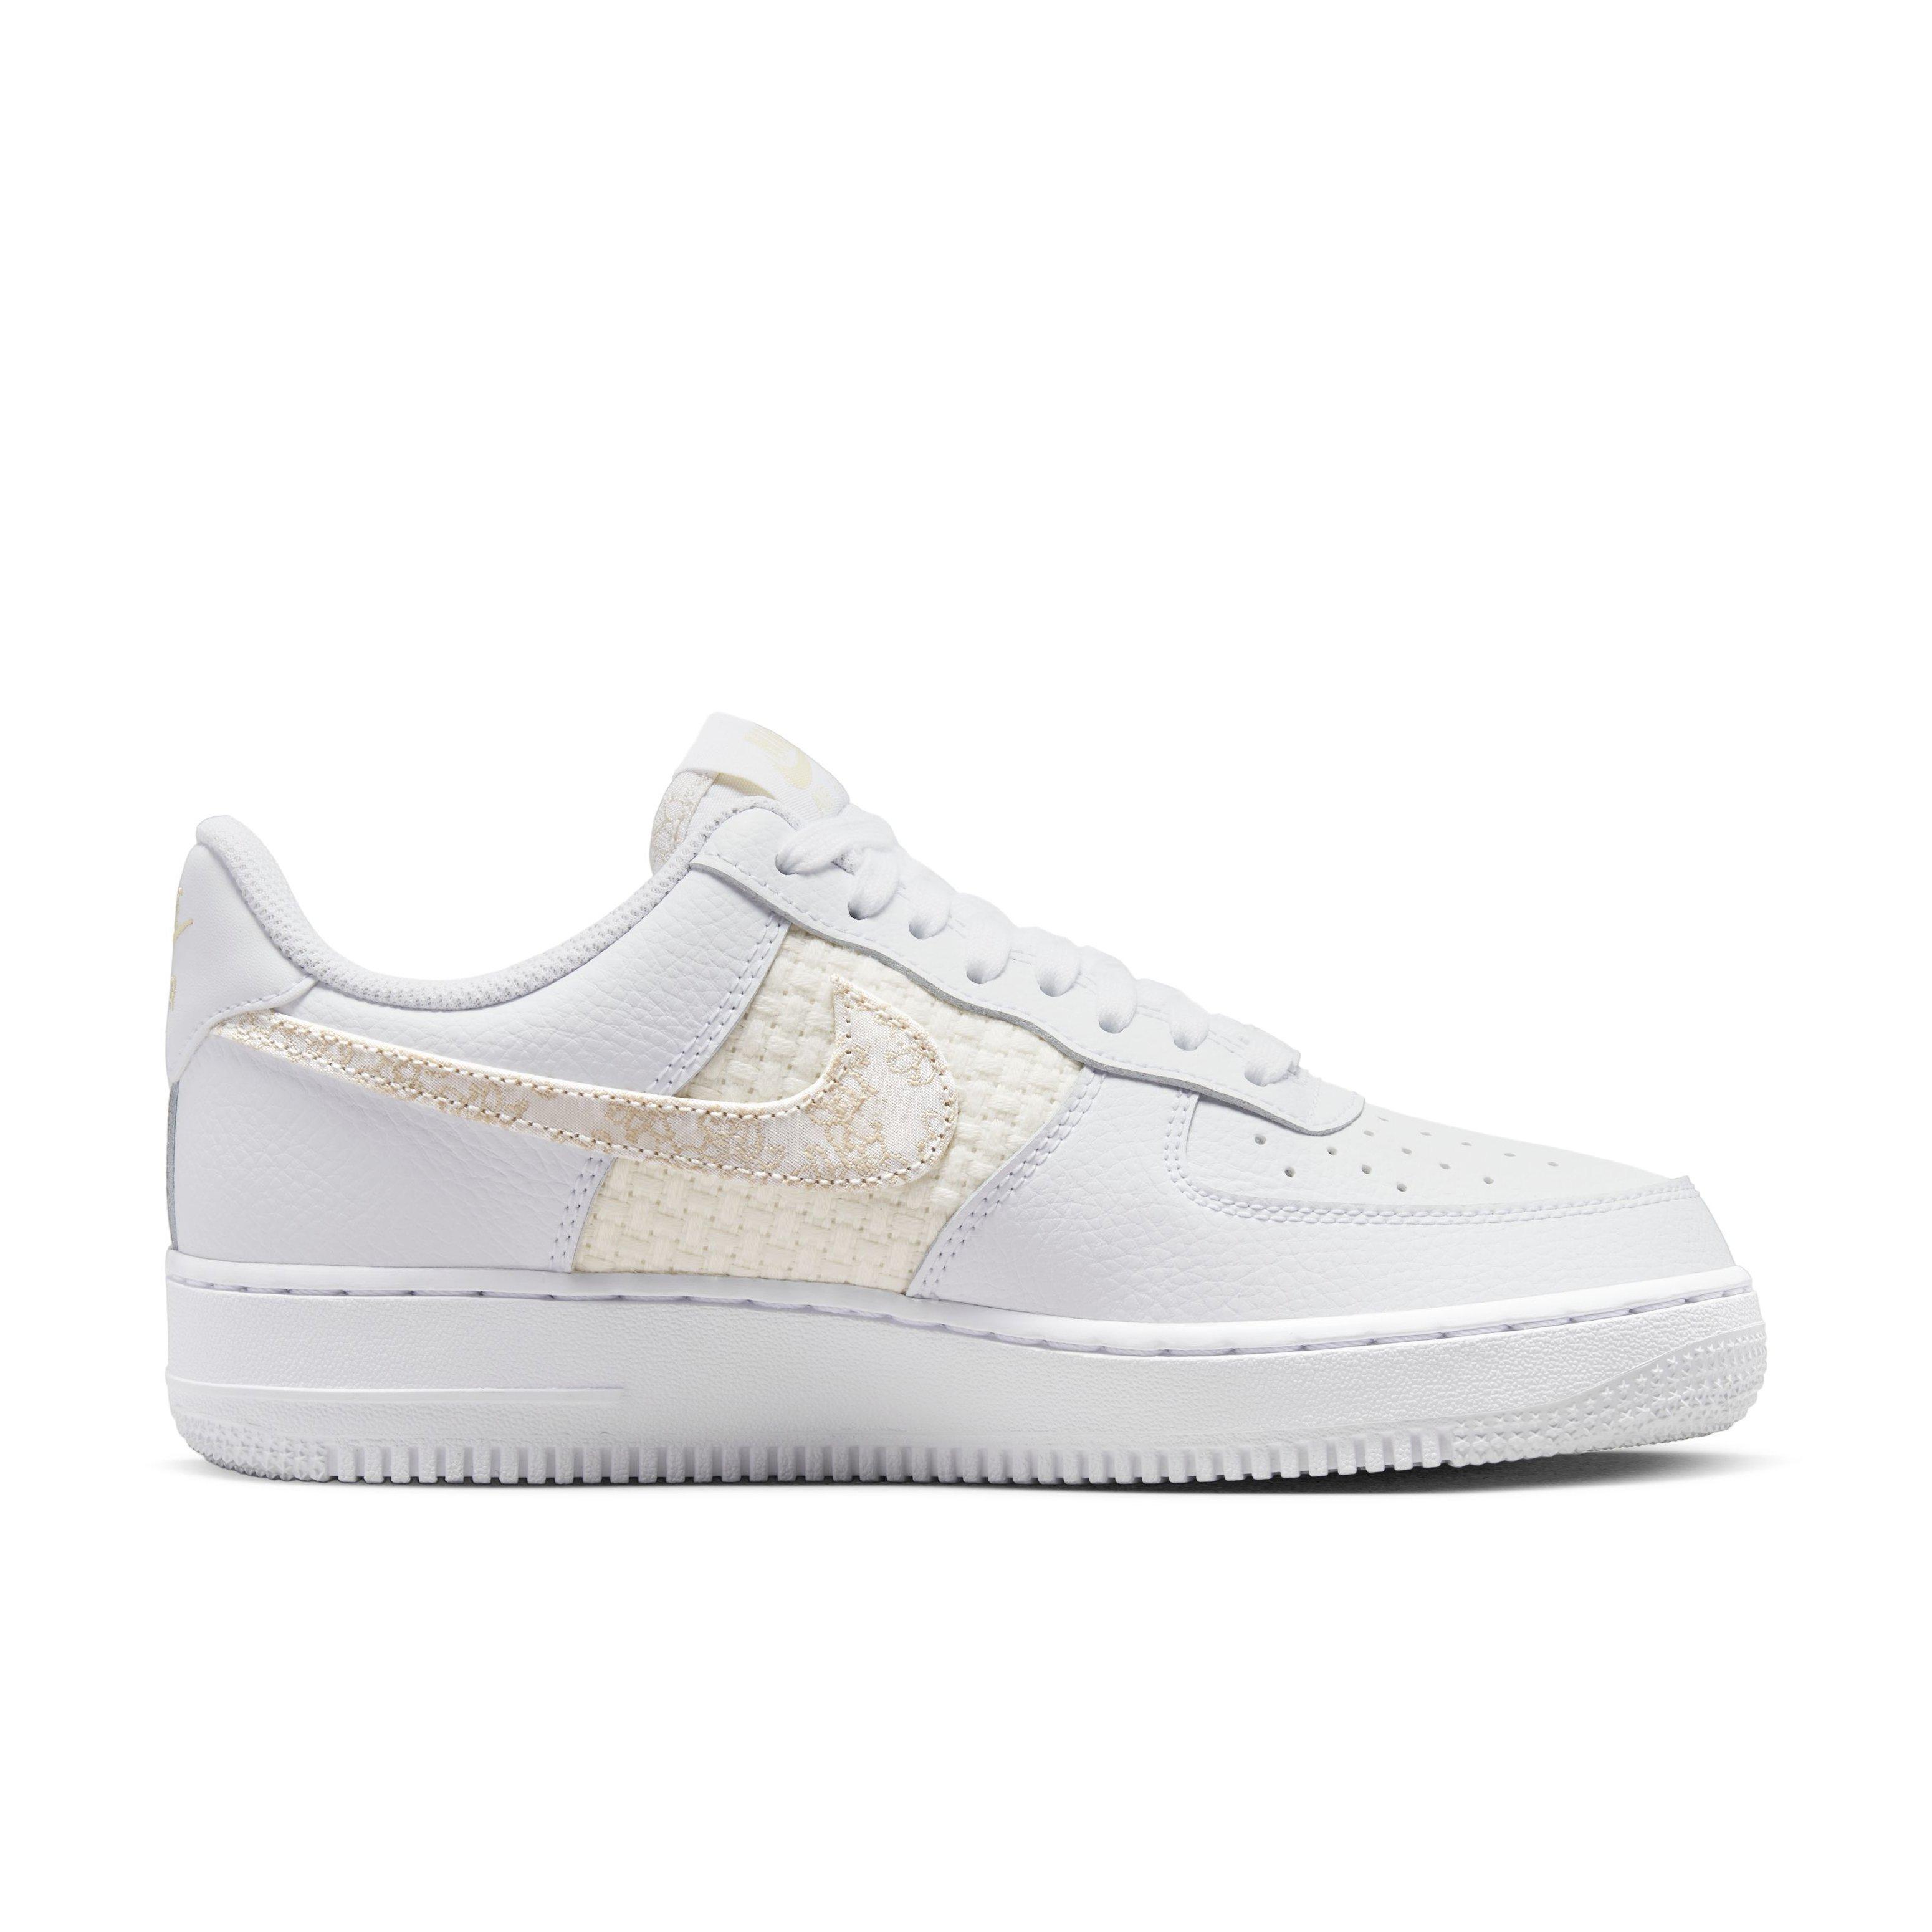 Nike Air Force 1 '07 Se Women's Sneakers White 896184-100